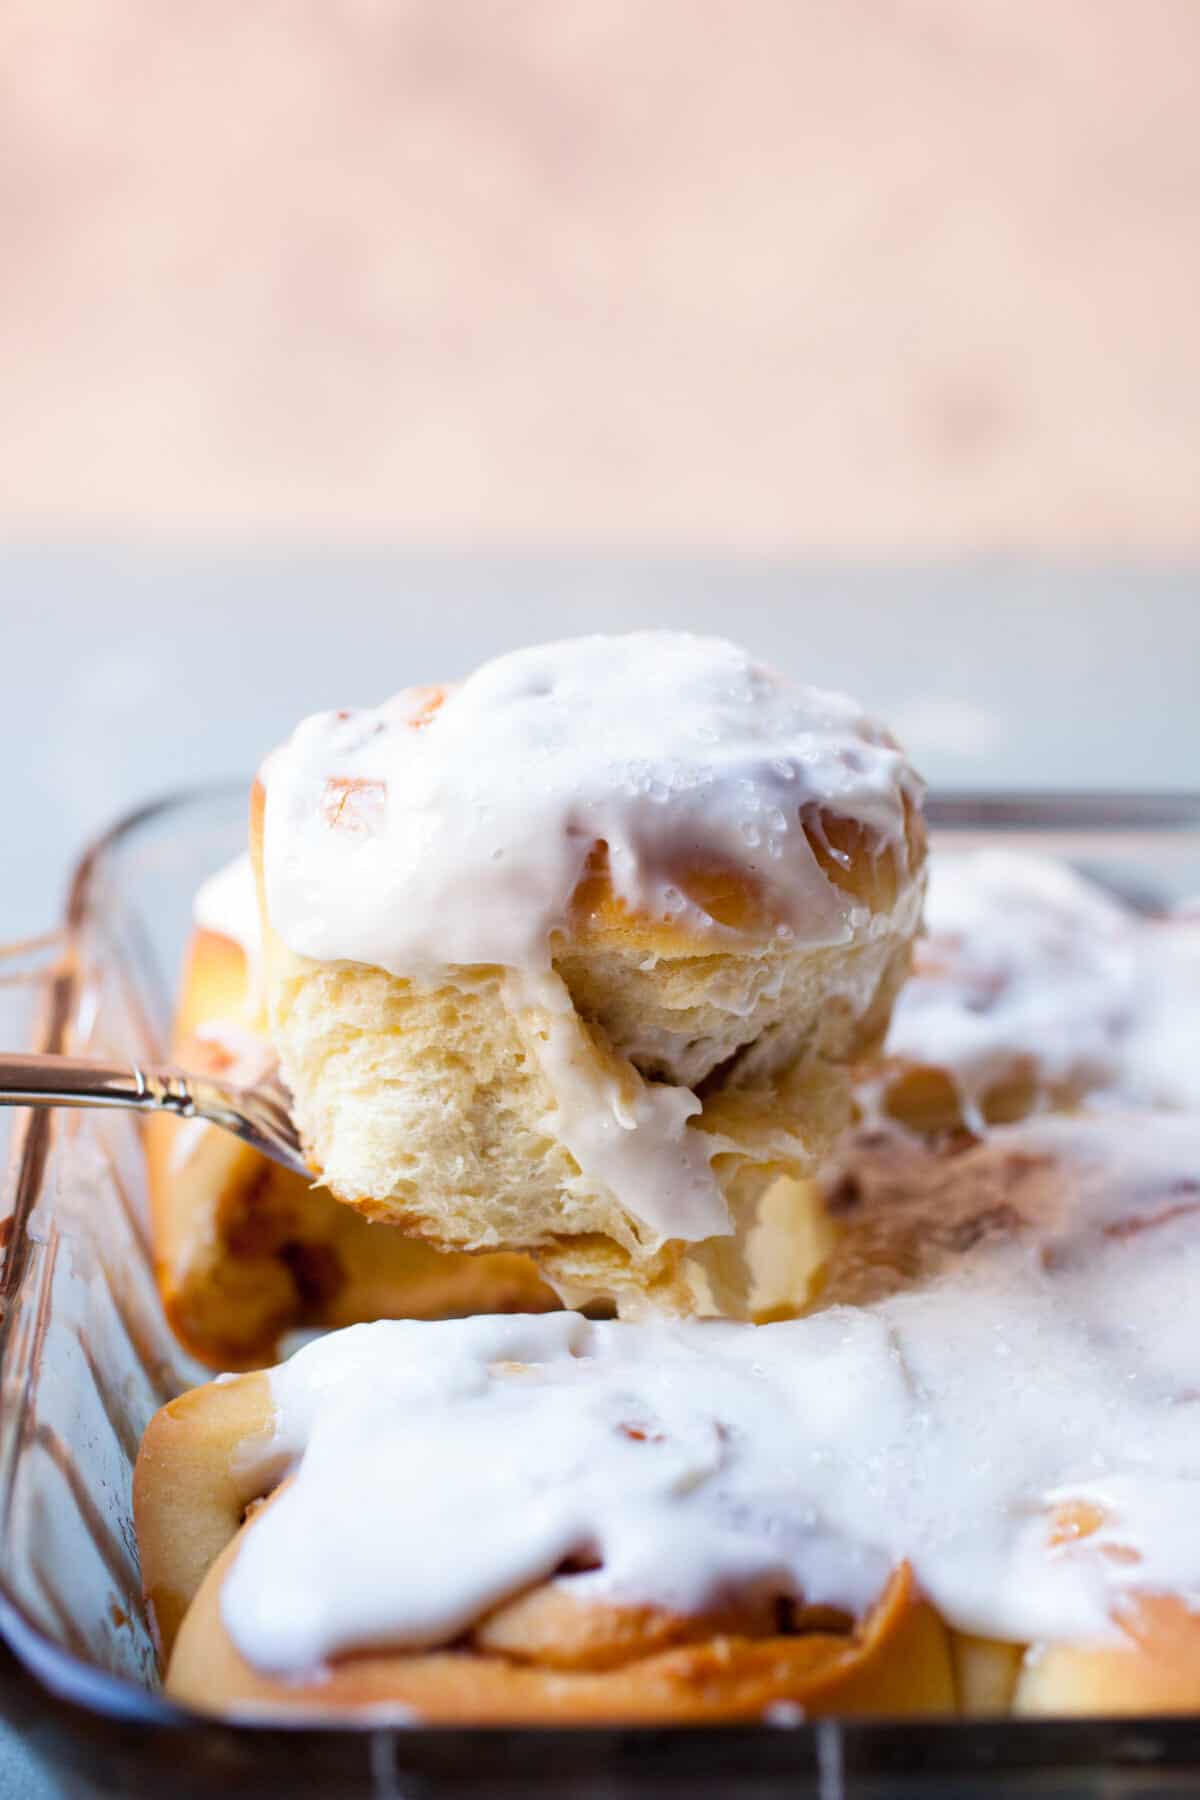 Overnight Cinnamon Rolls: These are one of my favorite slow food breakfasts. Sure, they take time to make, but the results are one of the best cinnamon rolls you'll eat. Enjoy. | macheesmo.com